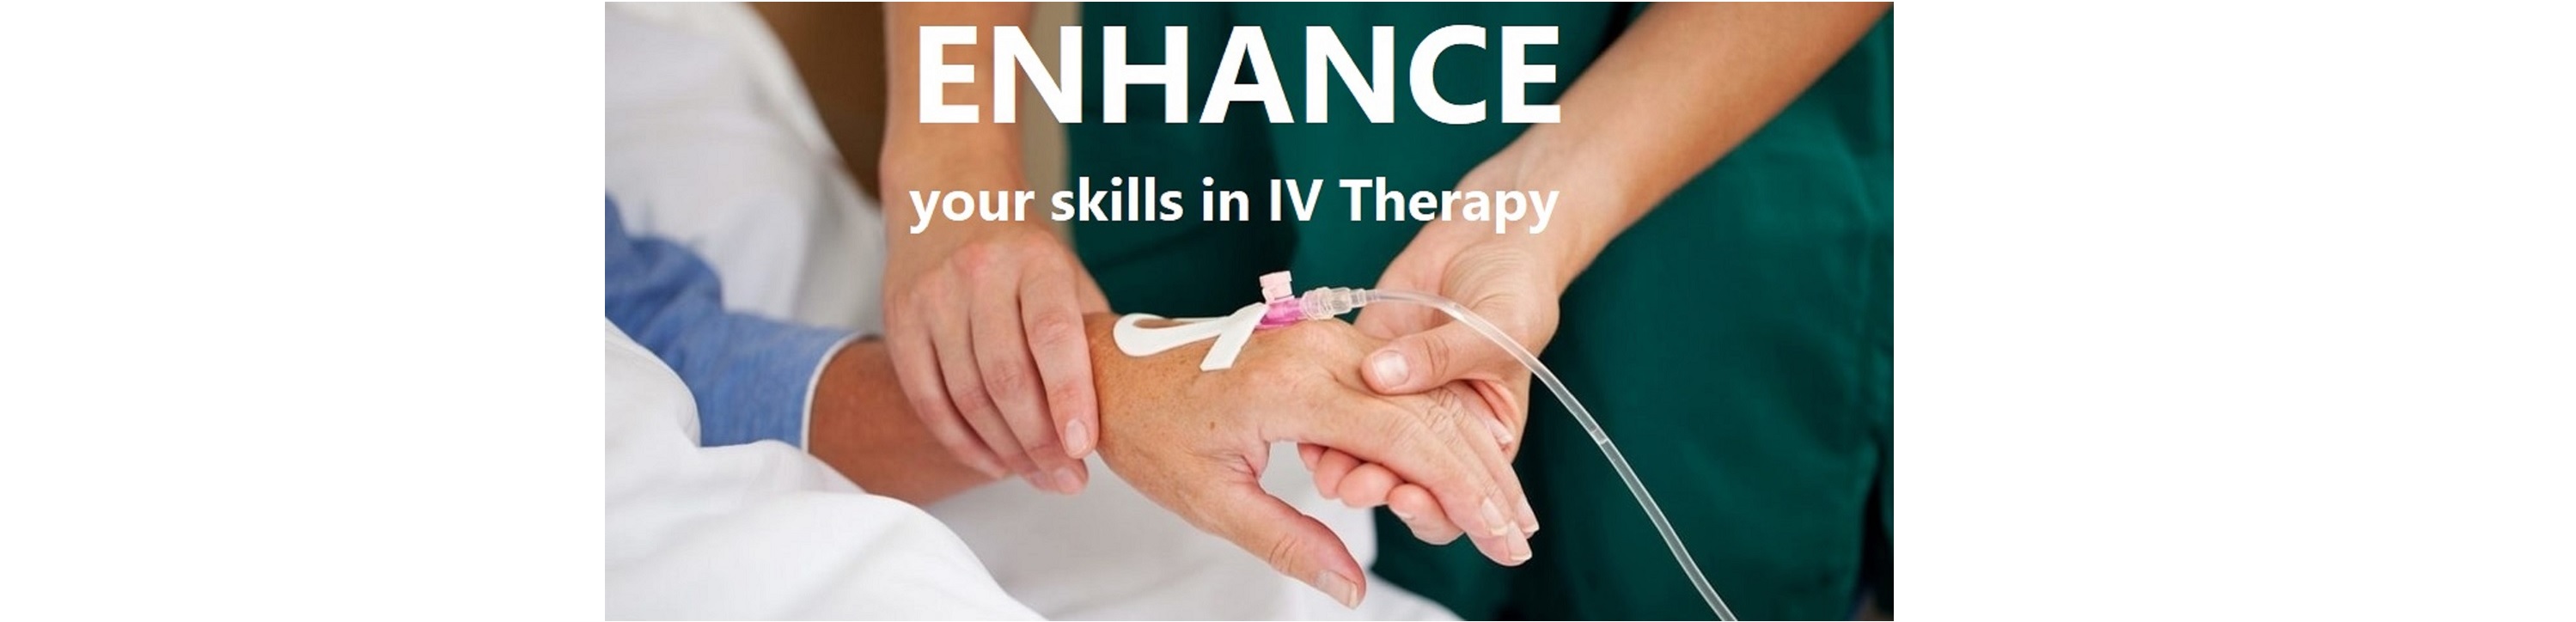 IV Therapy Course - Saturday, February 15, 2020 Banner